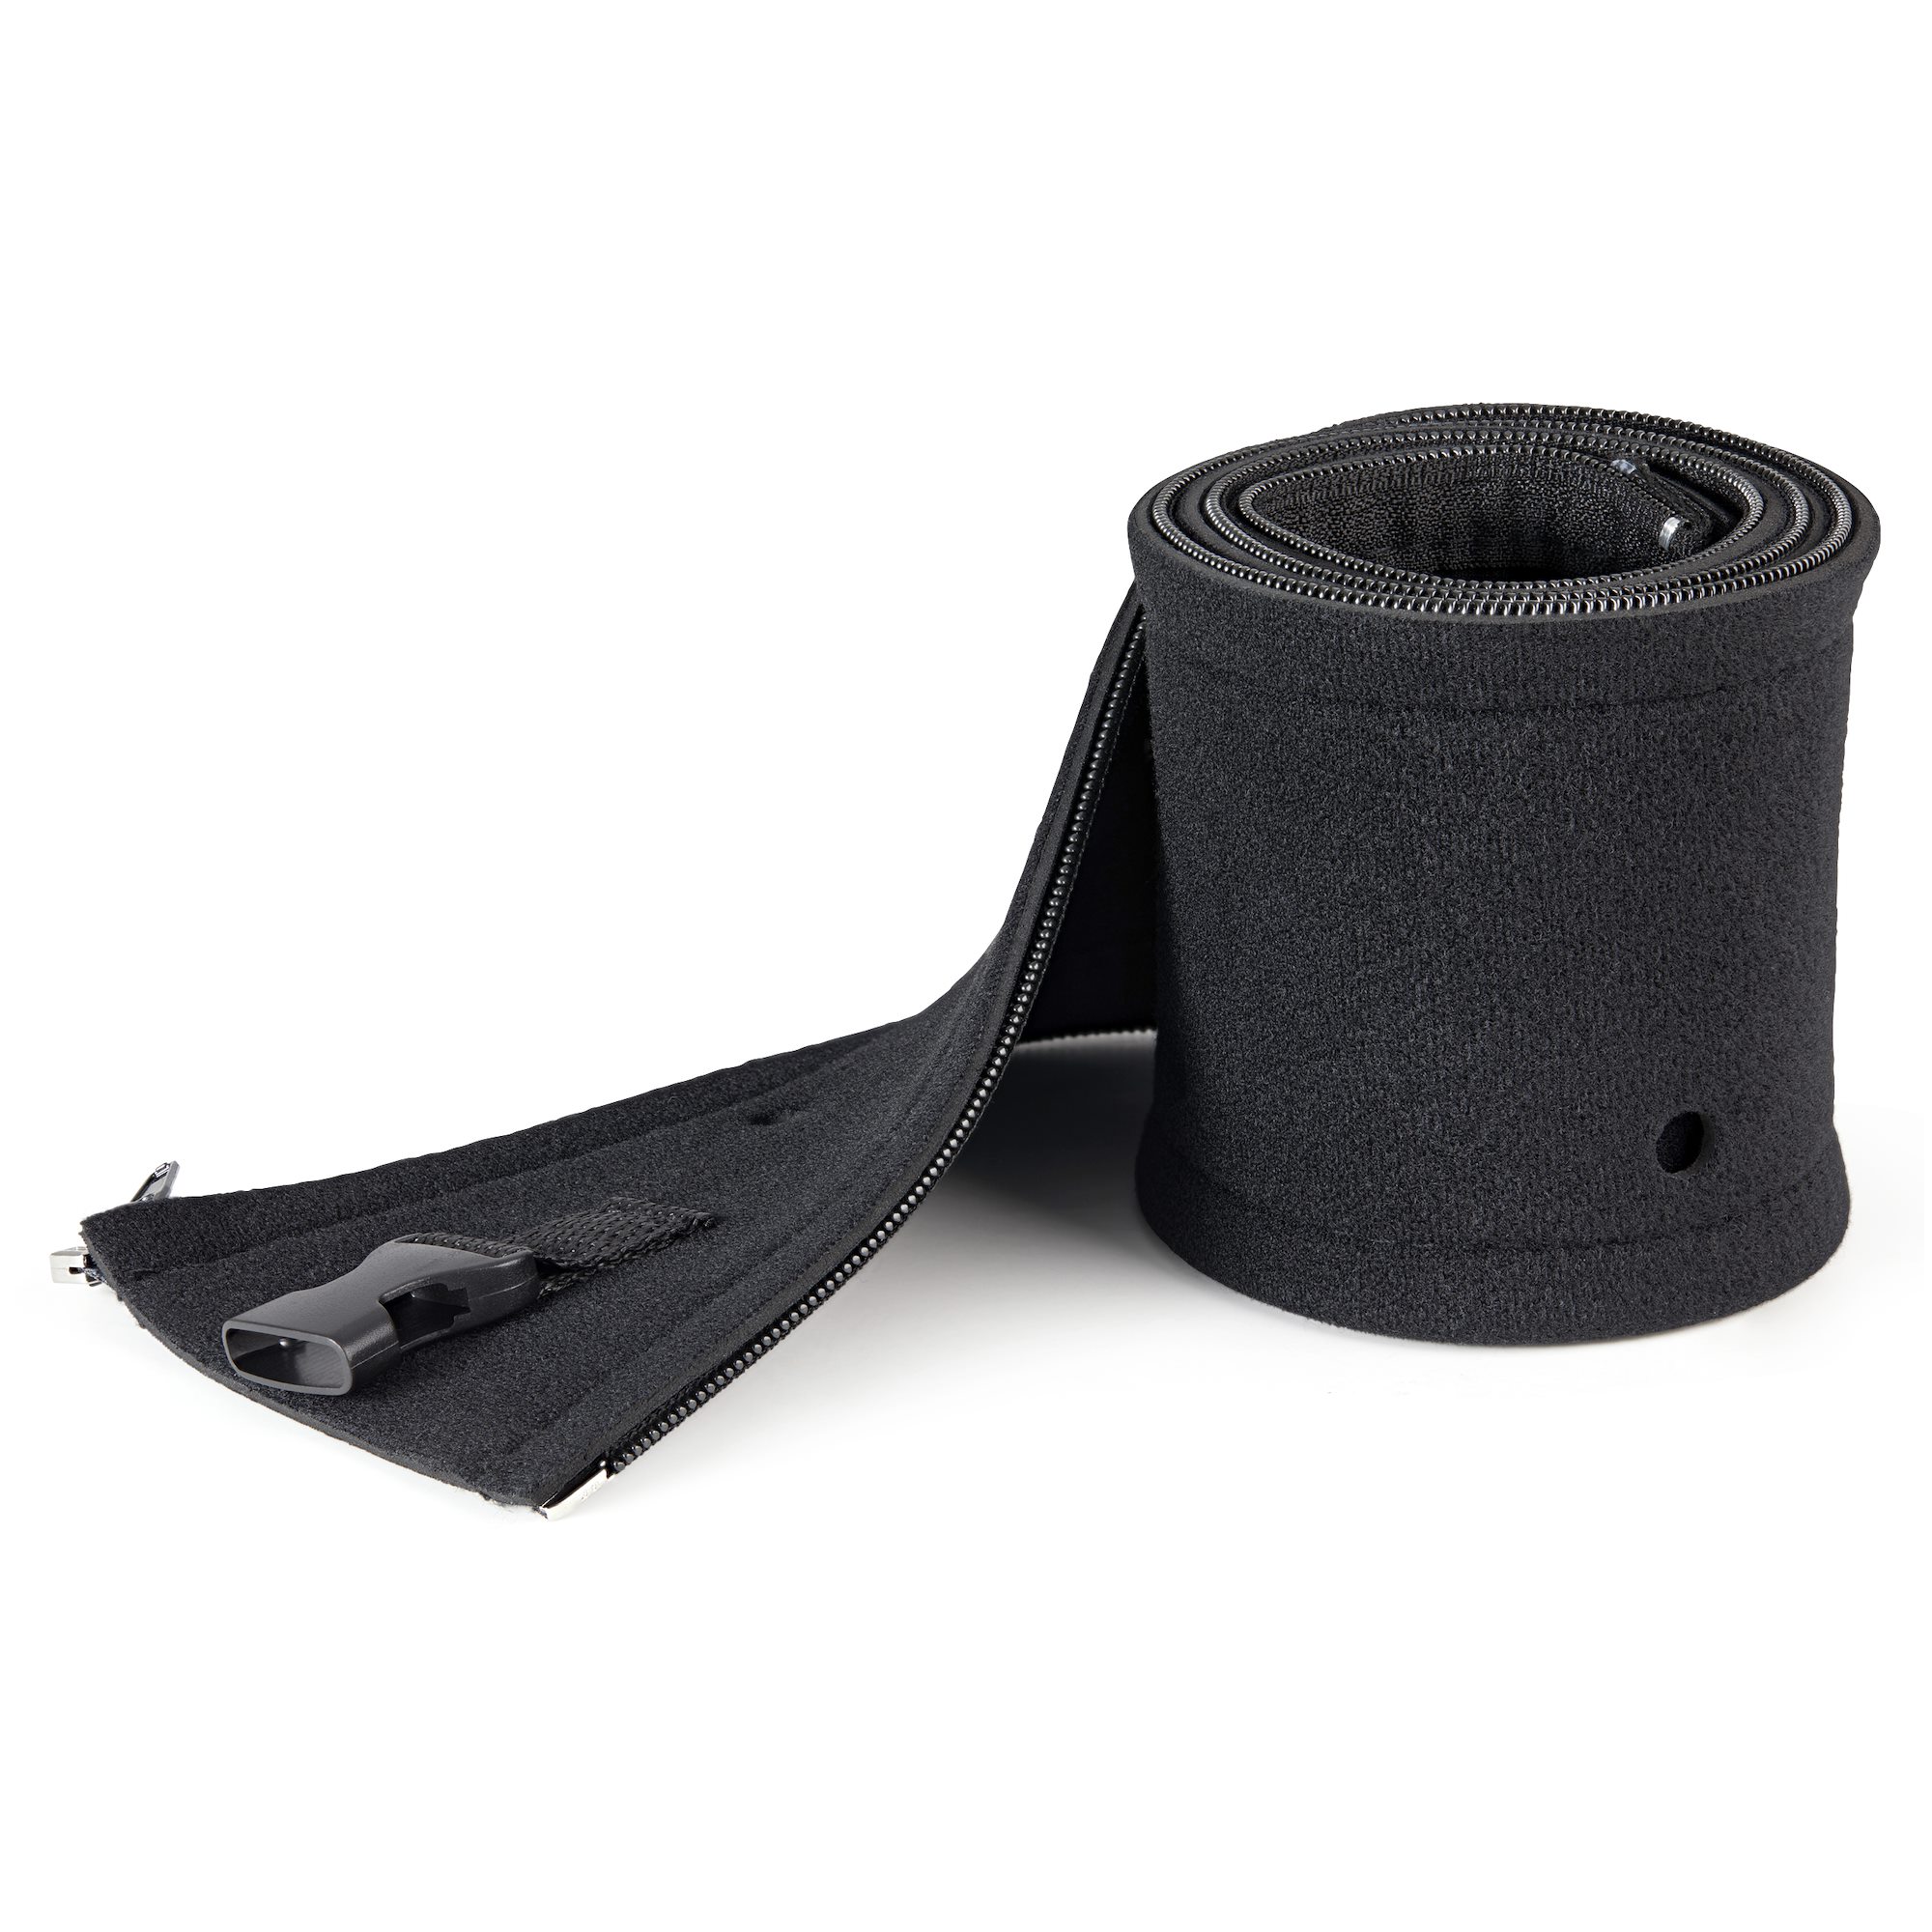 40inch Neoprene Cable Management Sleeve - Cable Routing Solutions, Cables